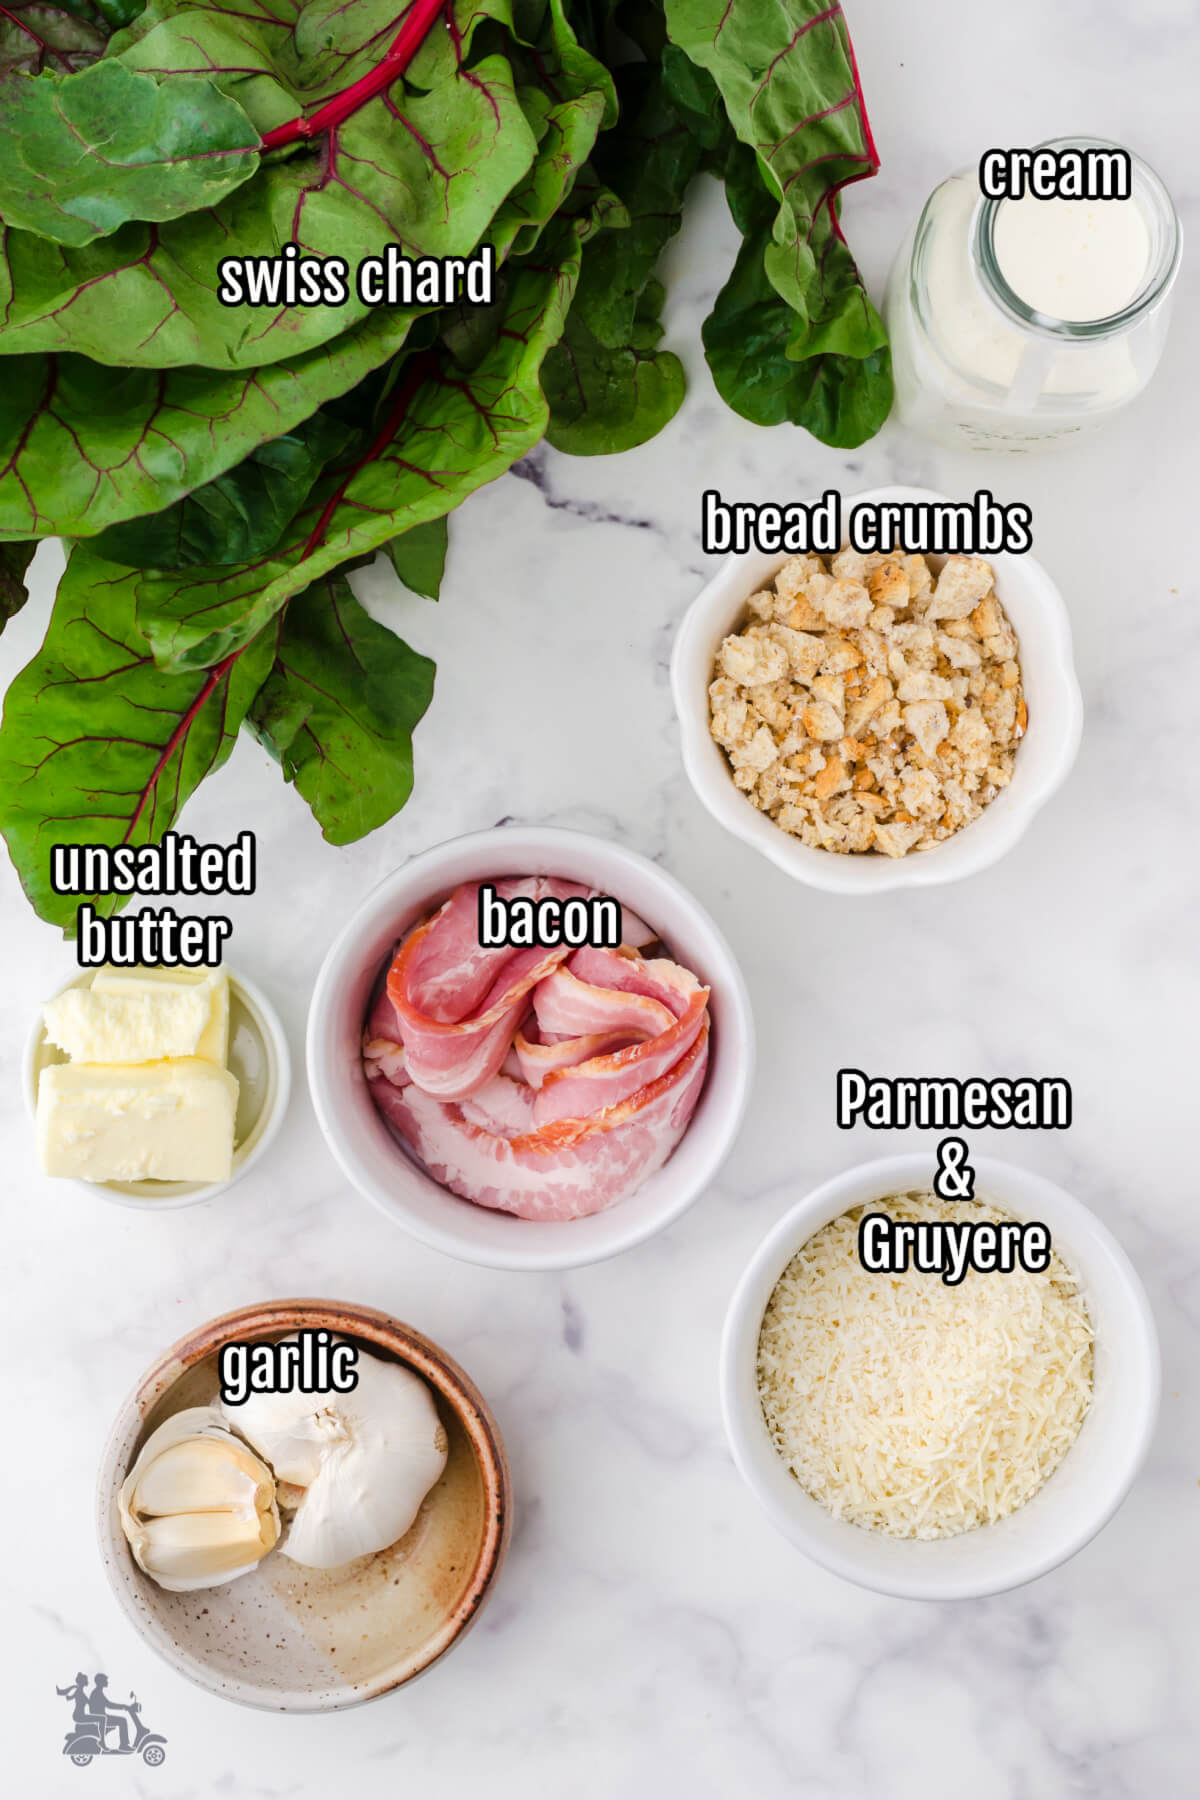 Ingredients for the Winter Greens Gratin.